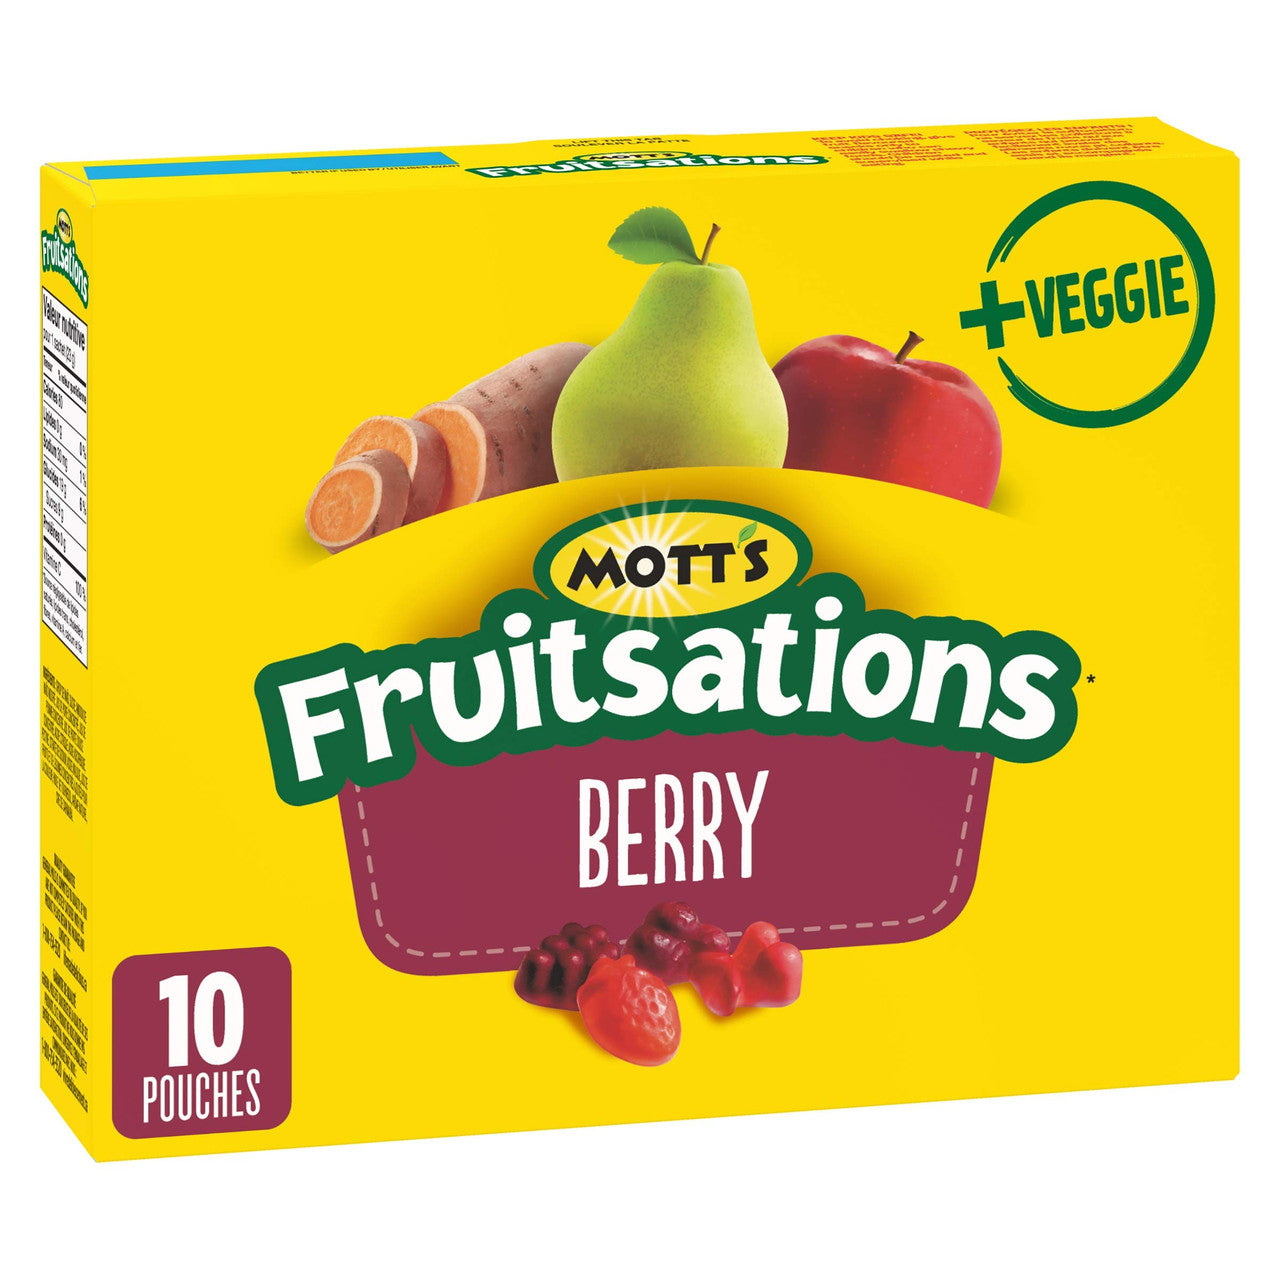 Mott's Fruitsations + Veggie Gluten Free Berry, 10ct, 226g/8oz., {Imported from Canada}